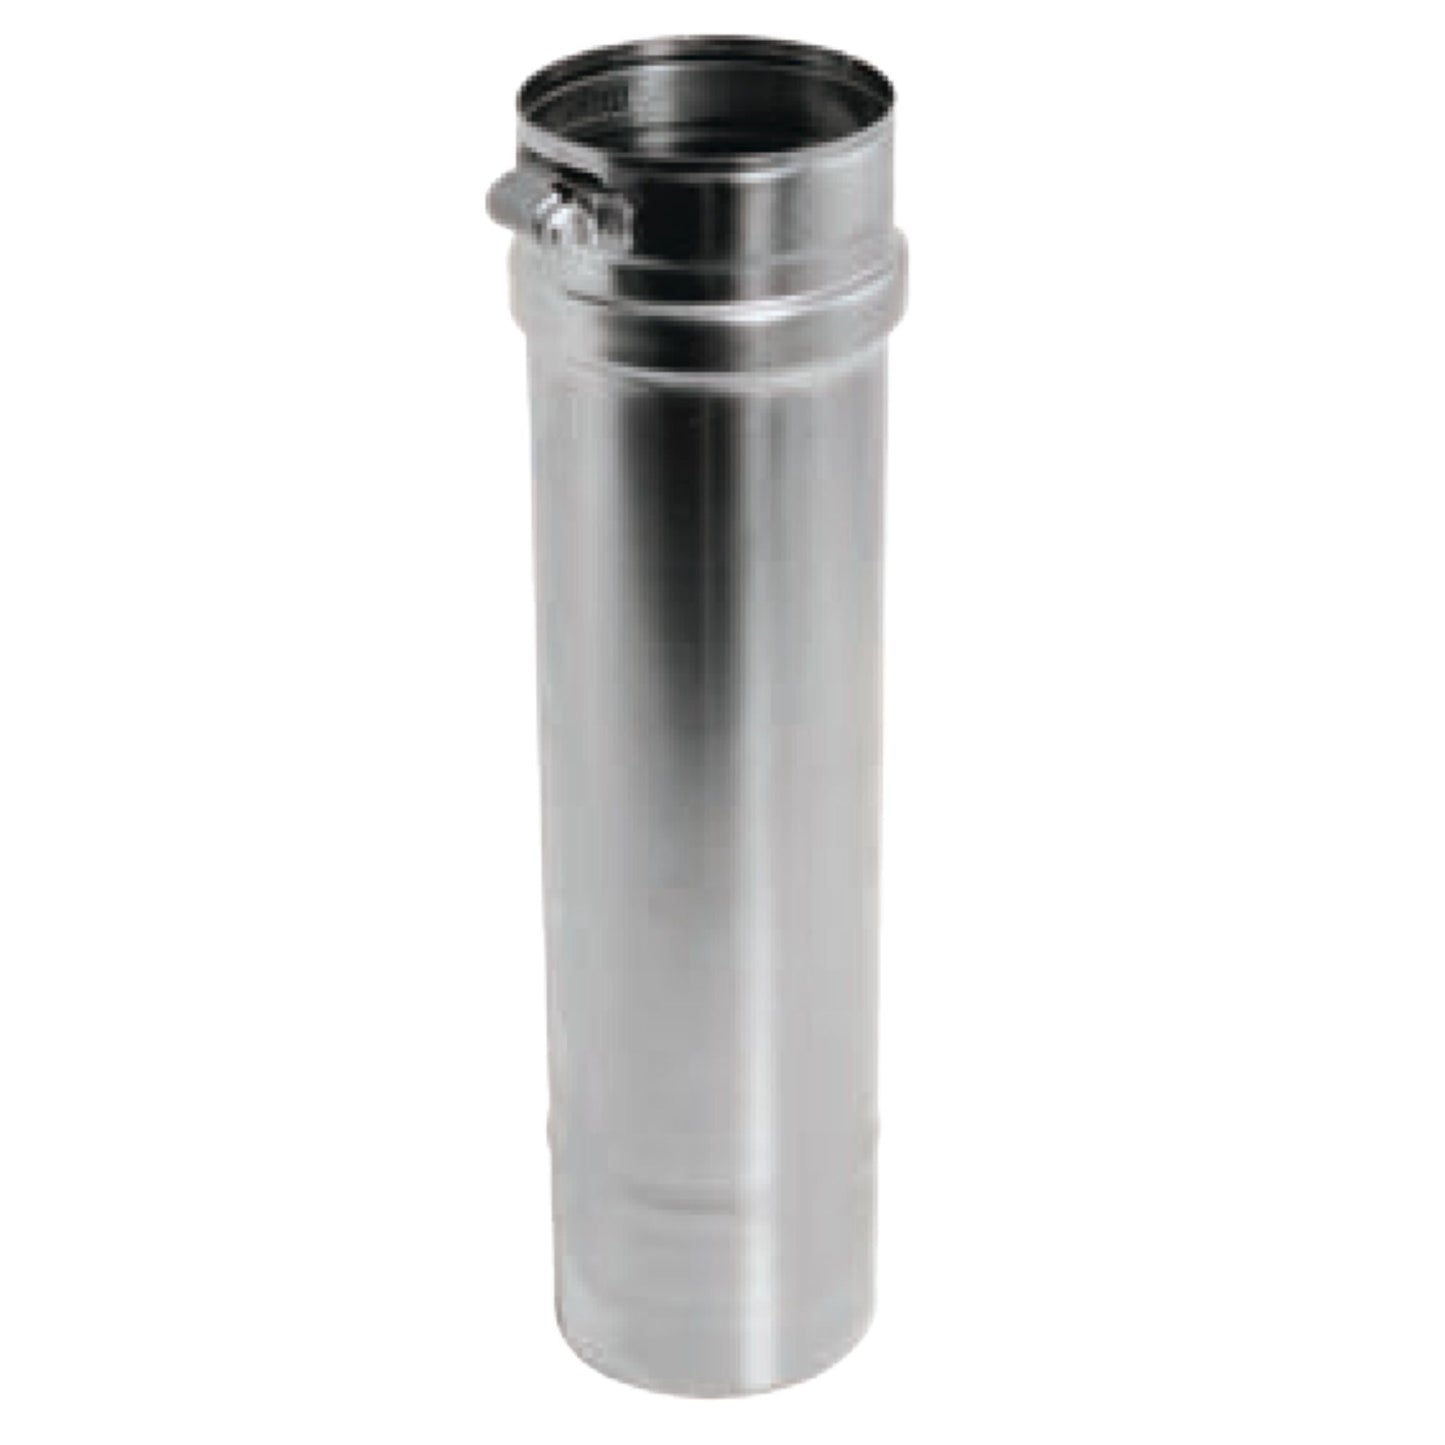 DuraVent FasNSeal 5" x 24" 29-4C Stainless Steel Vent Length